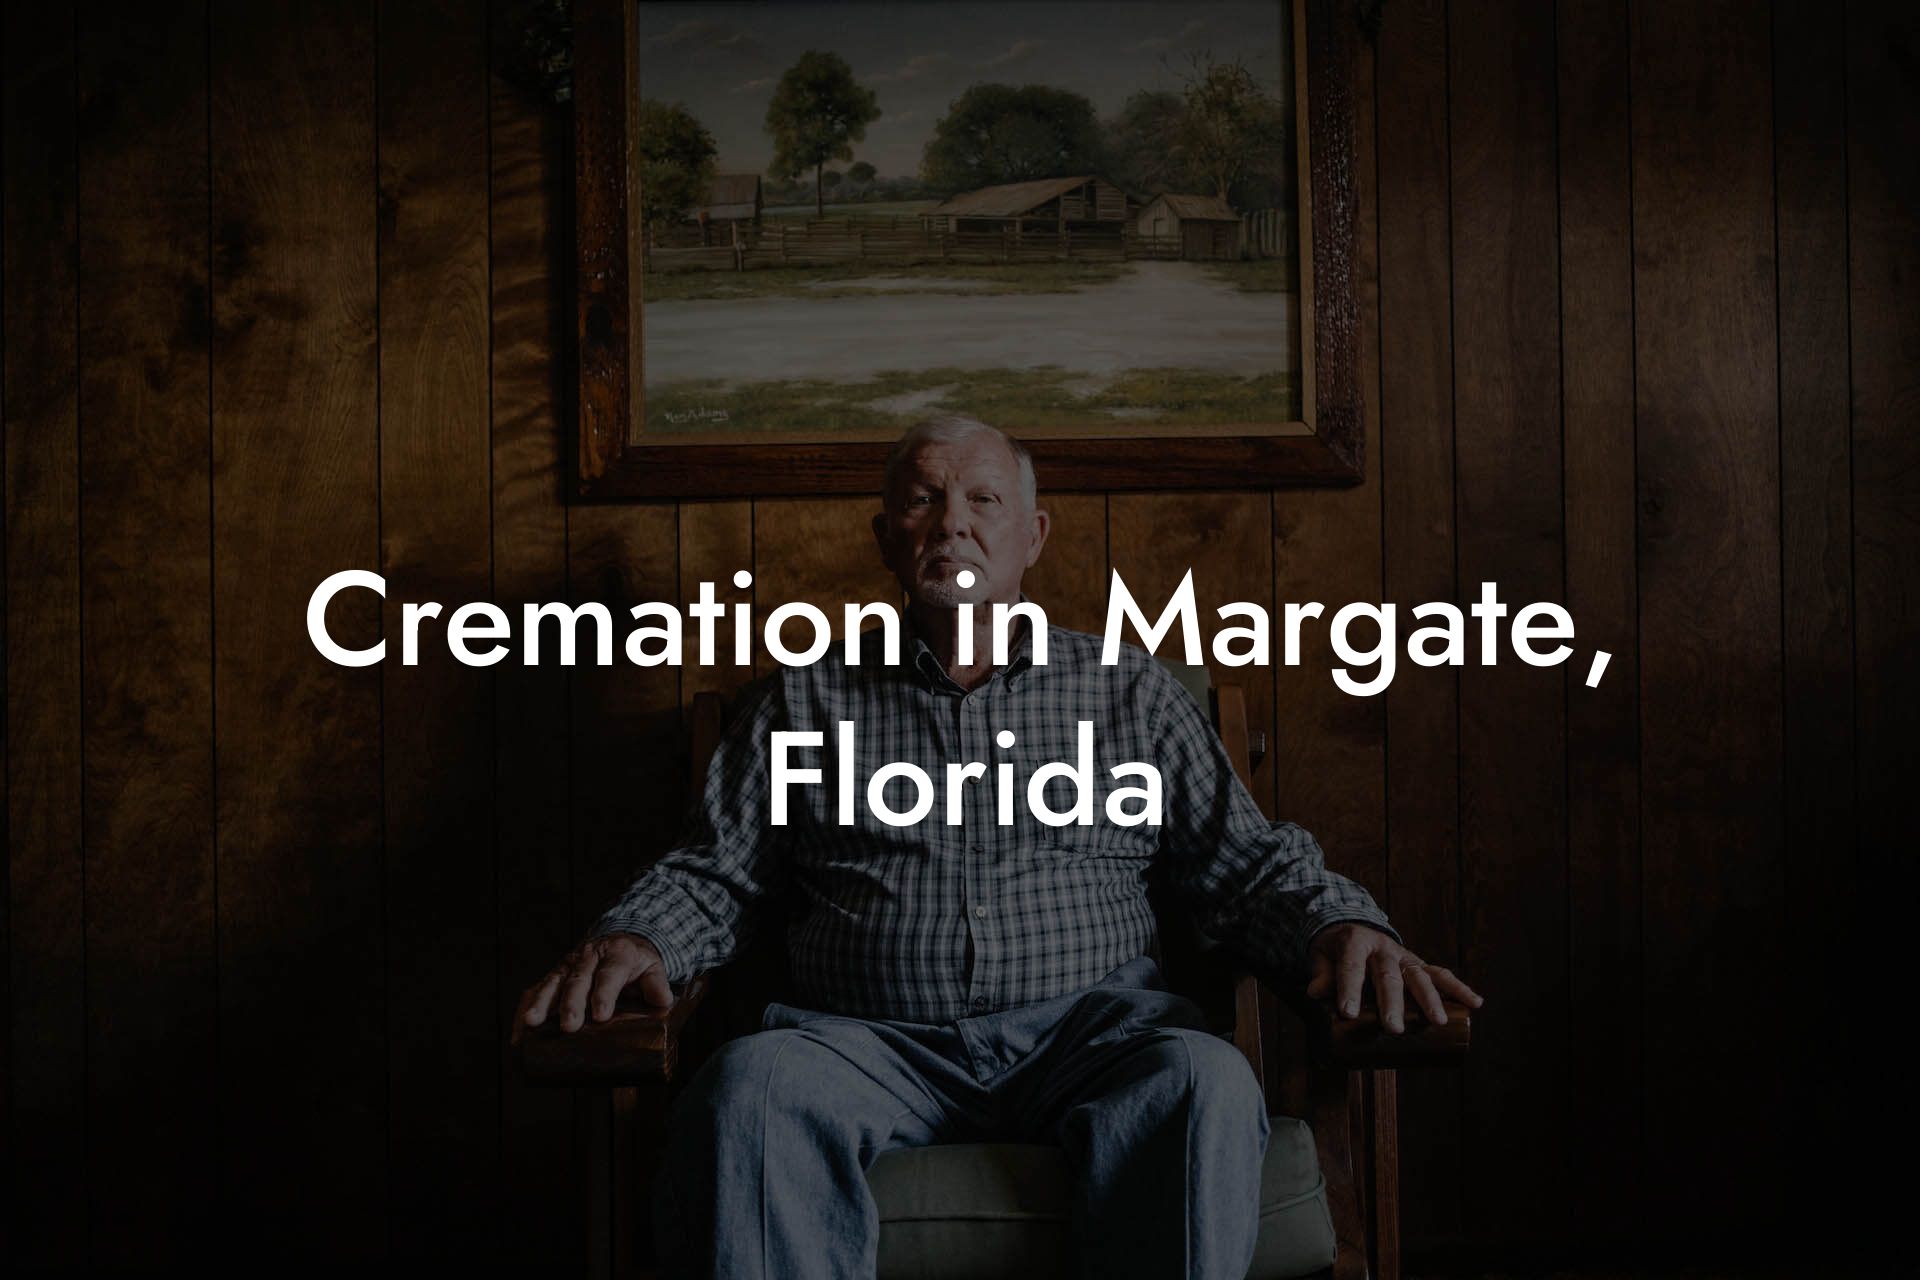 Cremation in Margate, Florida